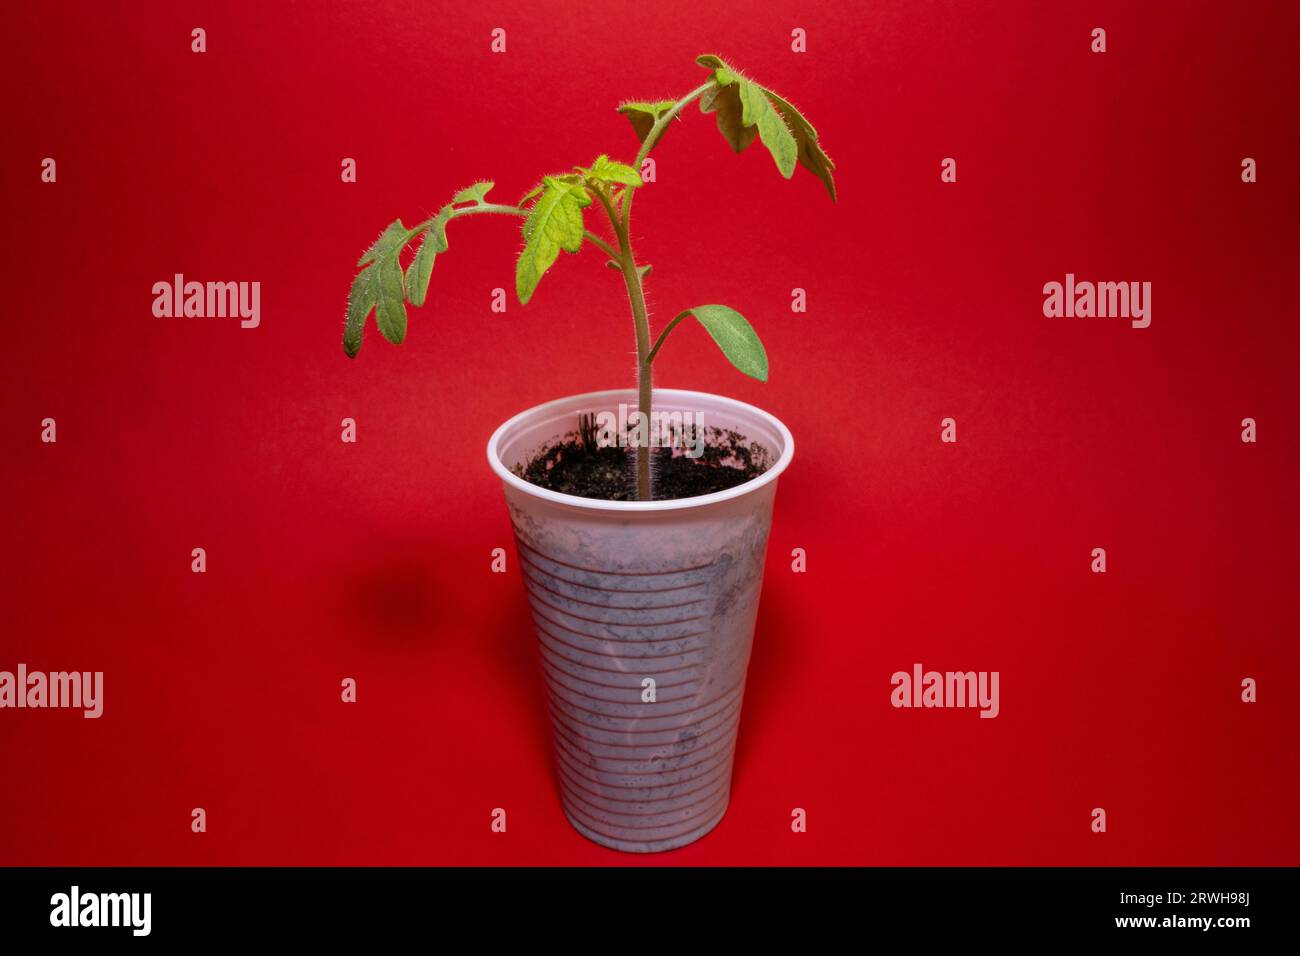 Small tomato plant in a white plastic cup with red background Stock Photo